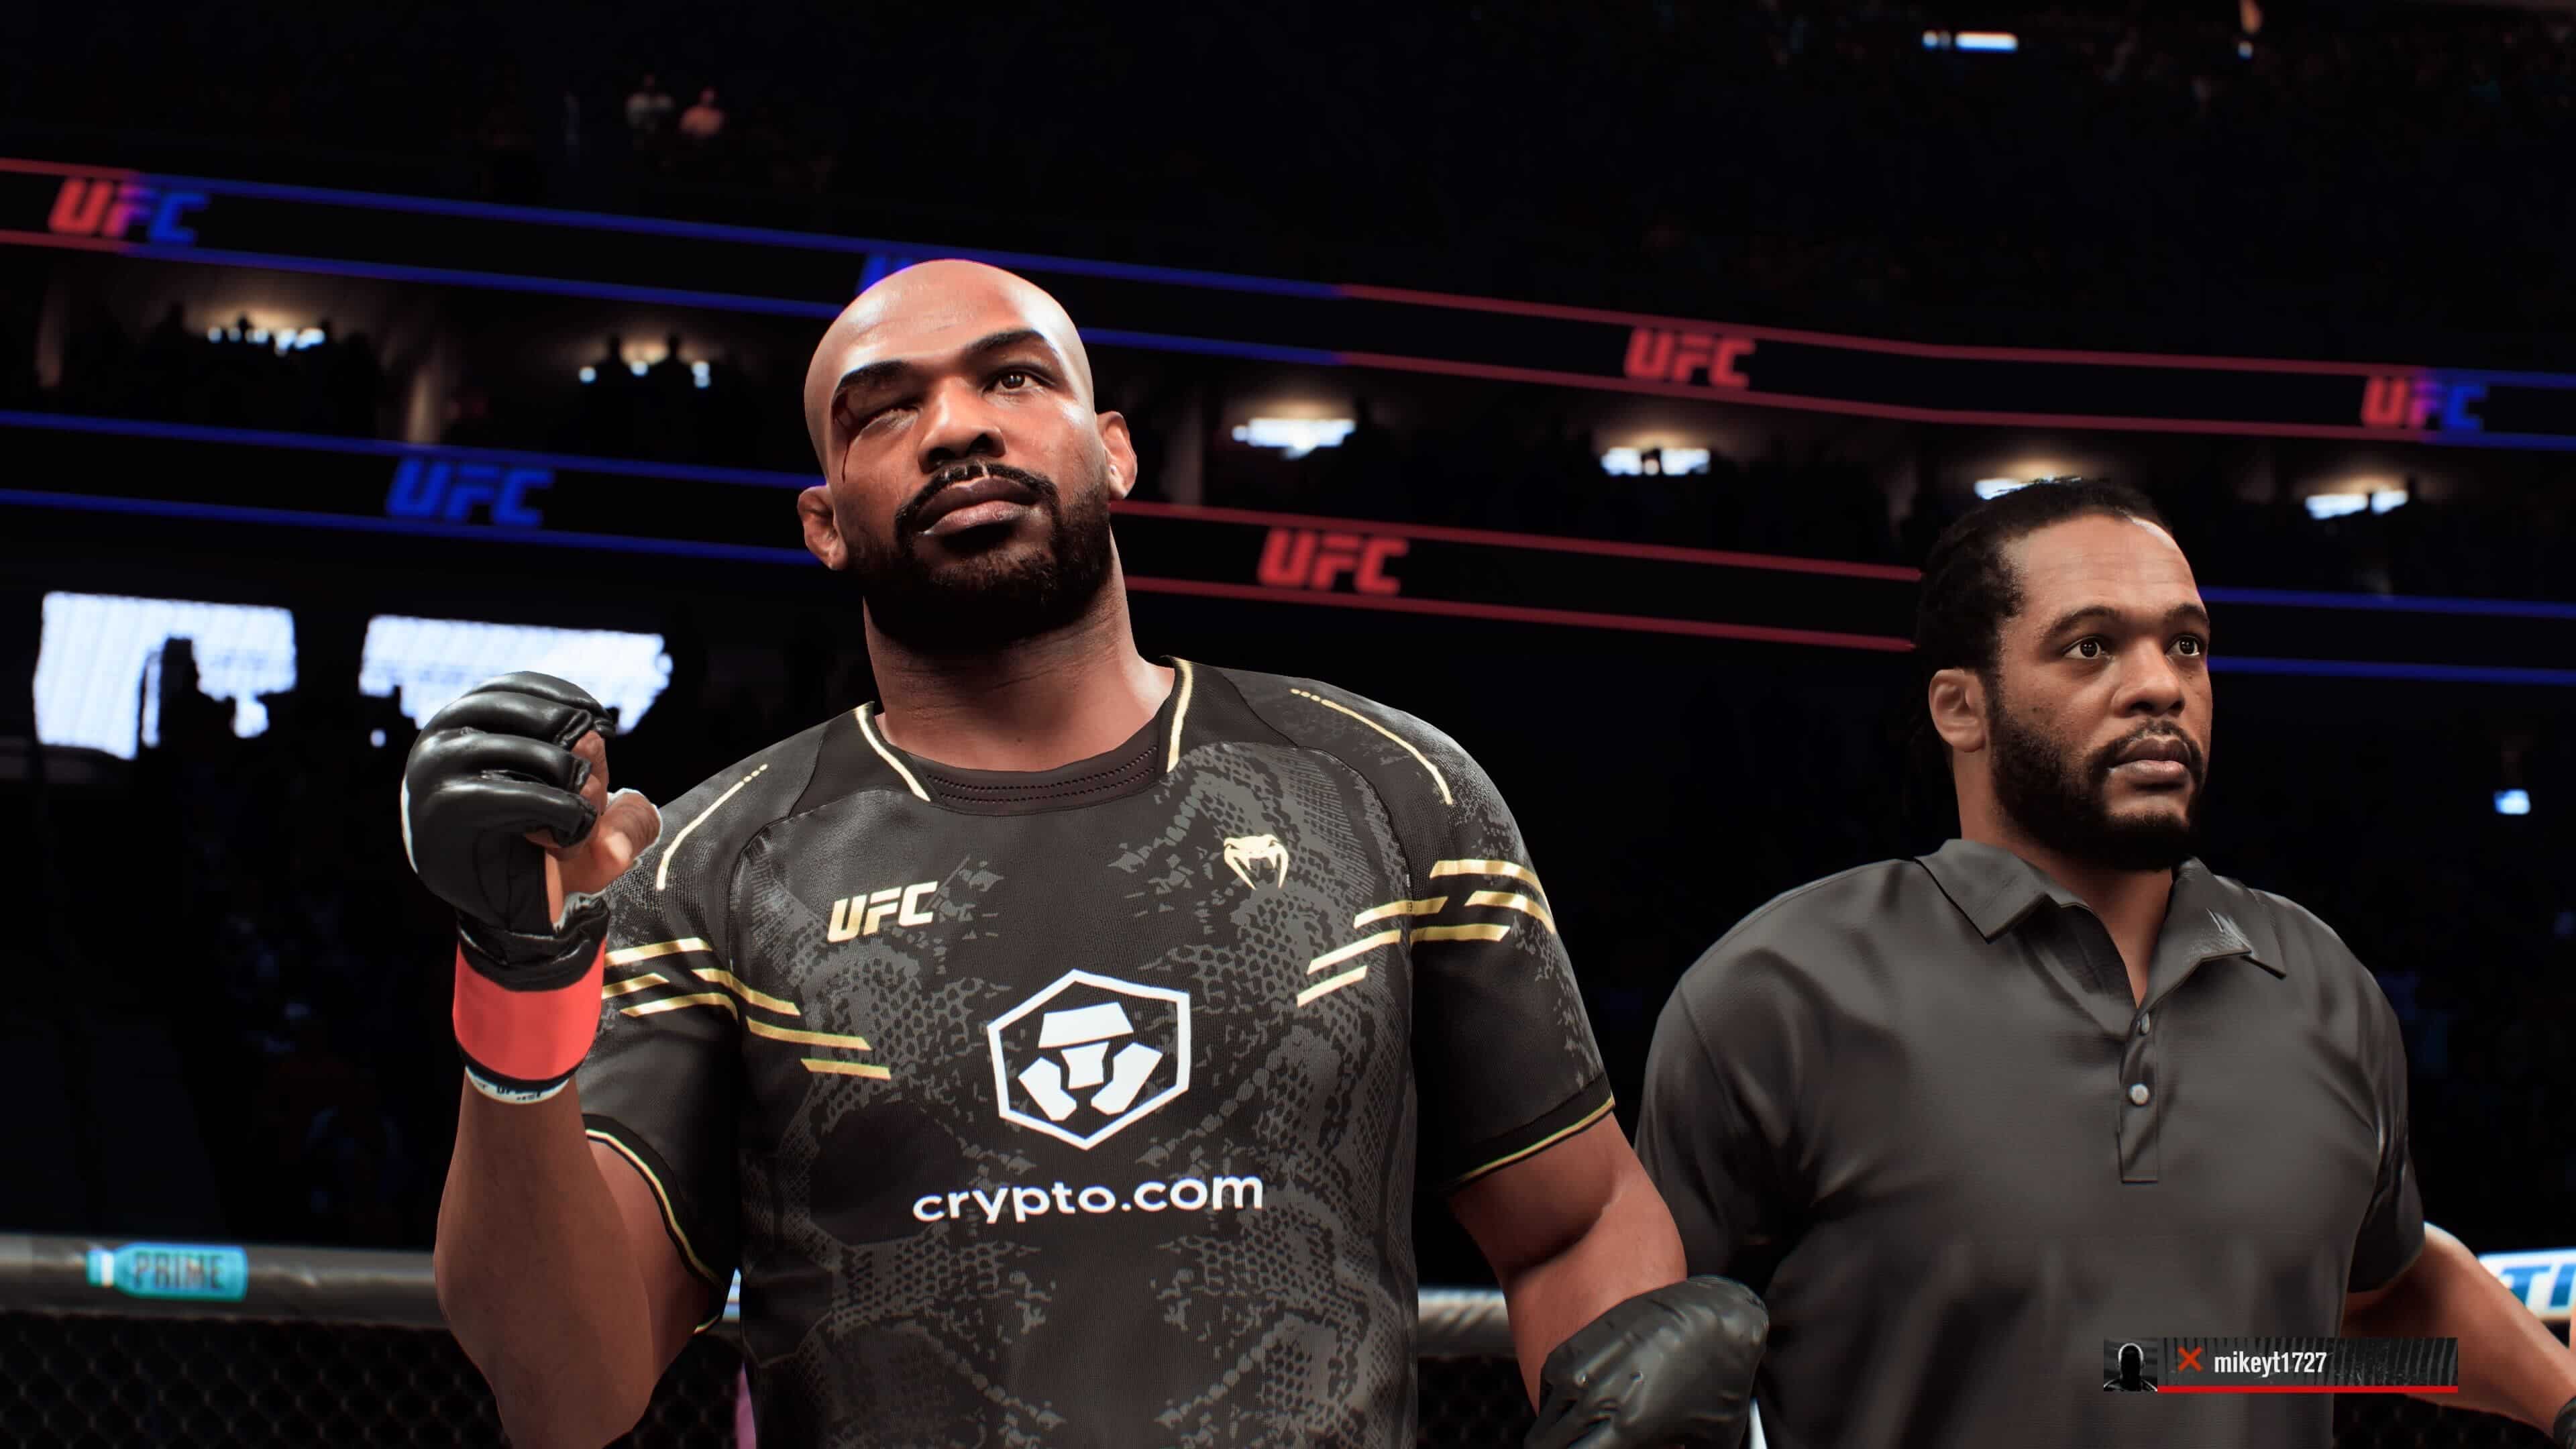 UFC 5 – How to invite and play with friends